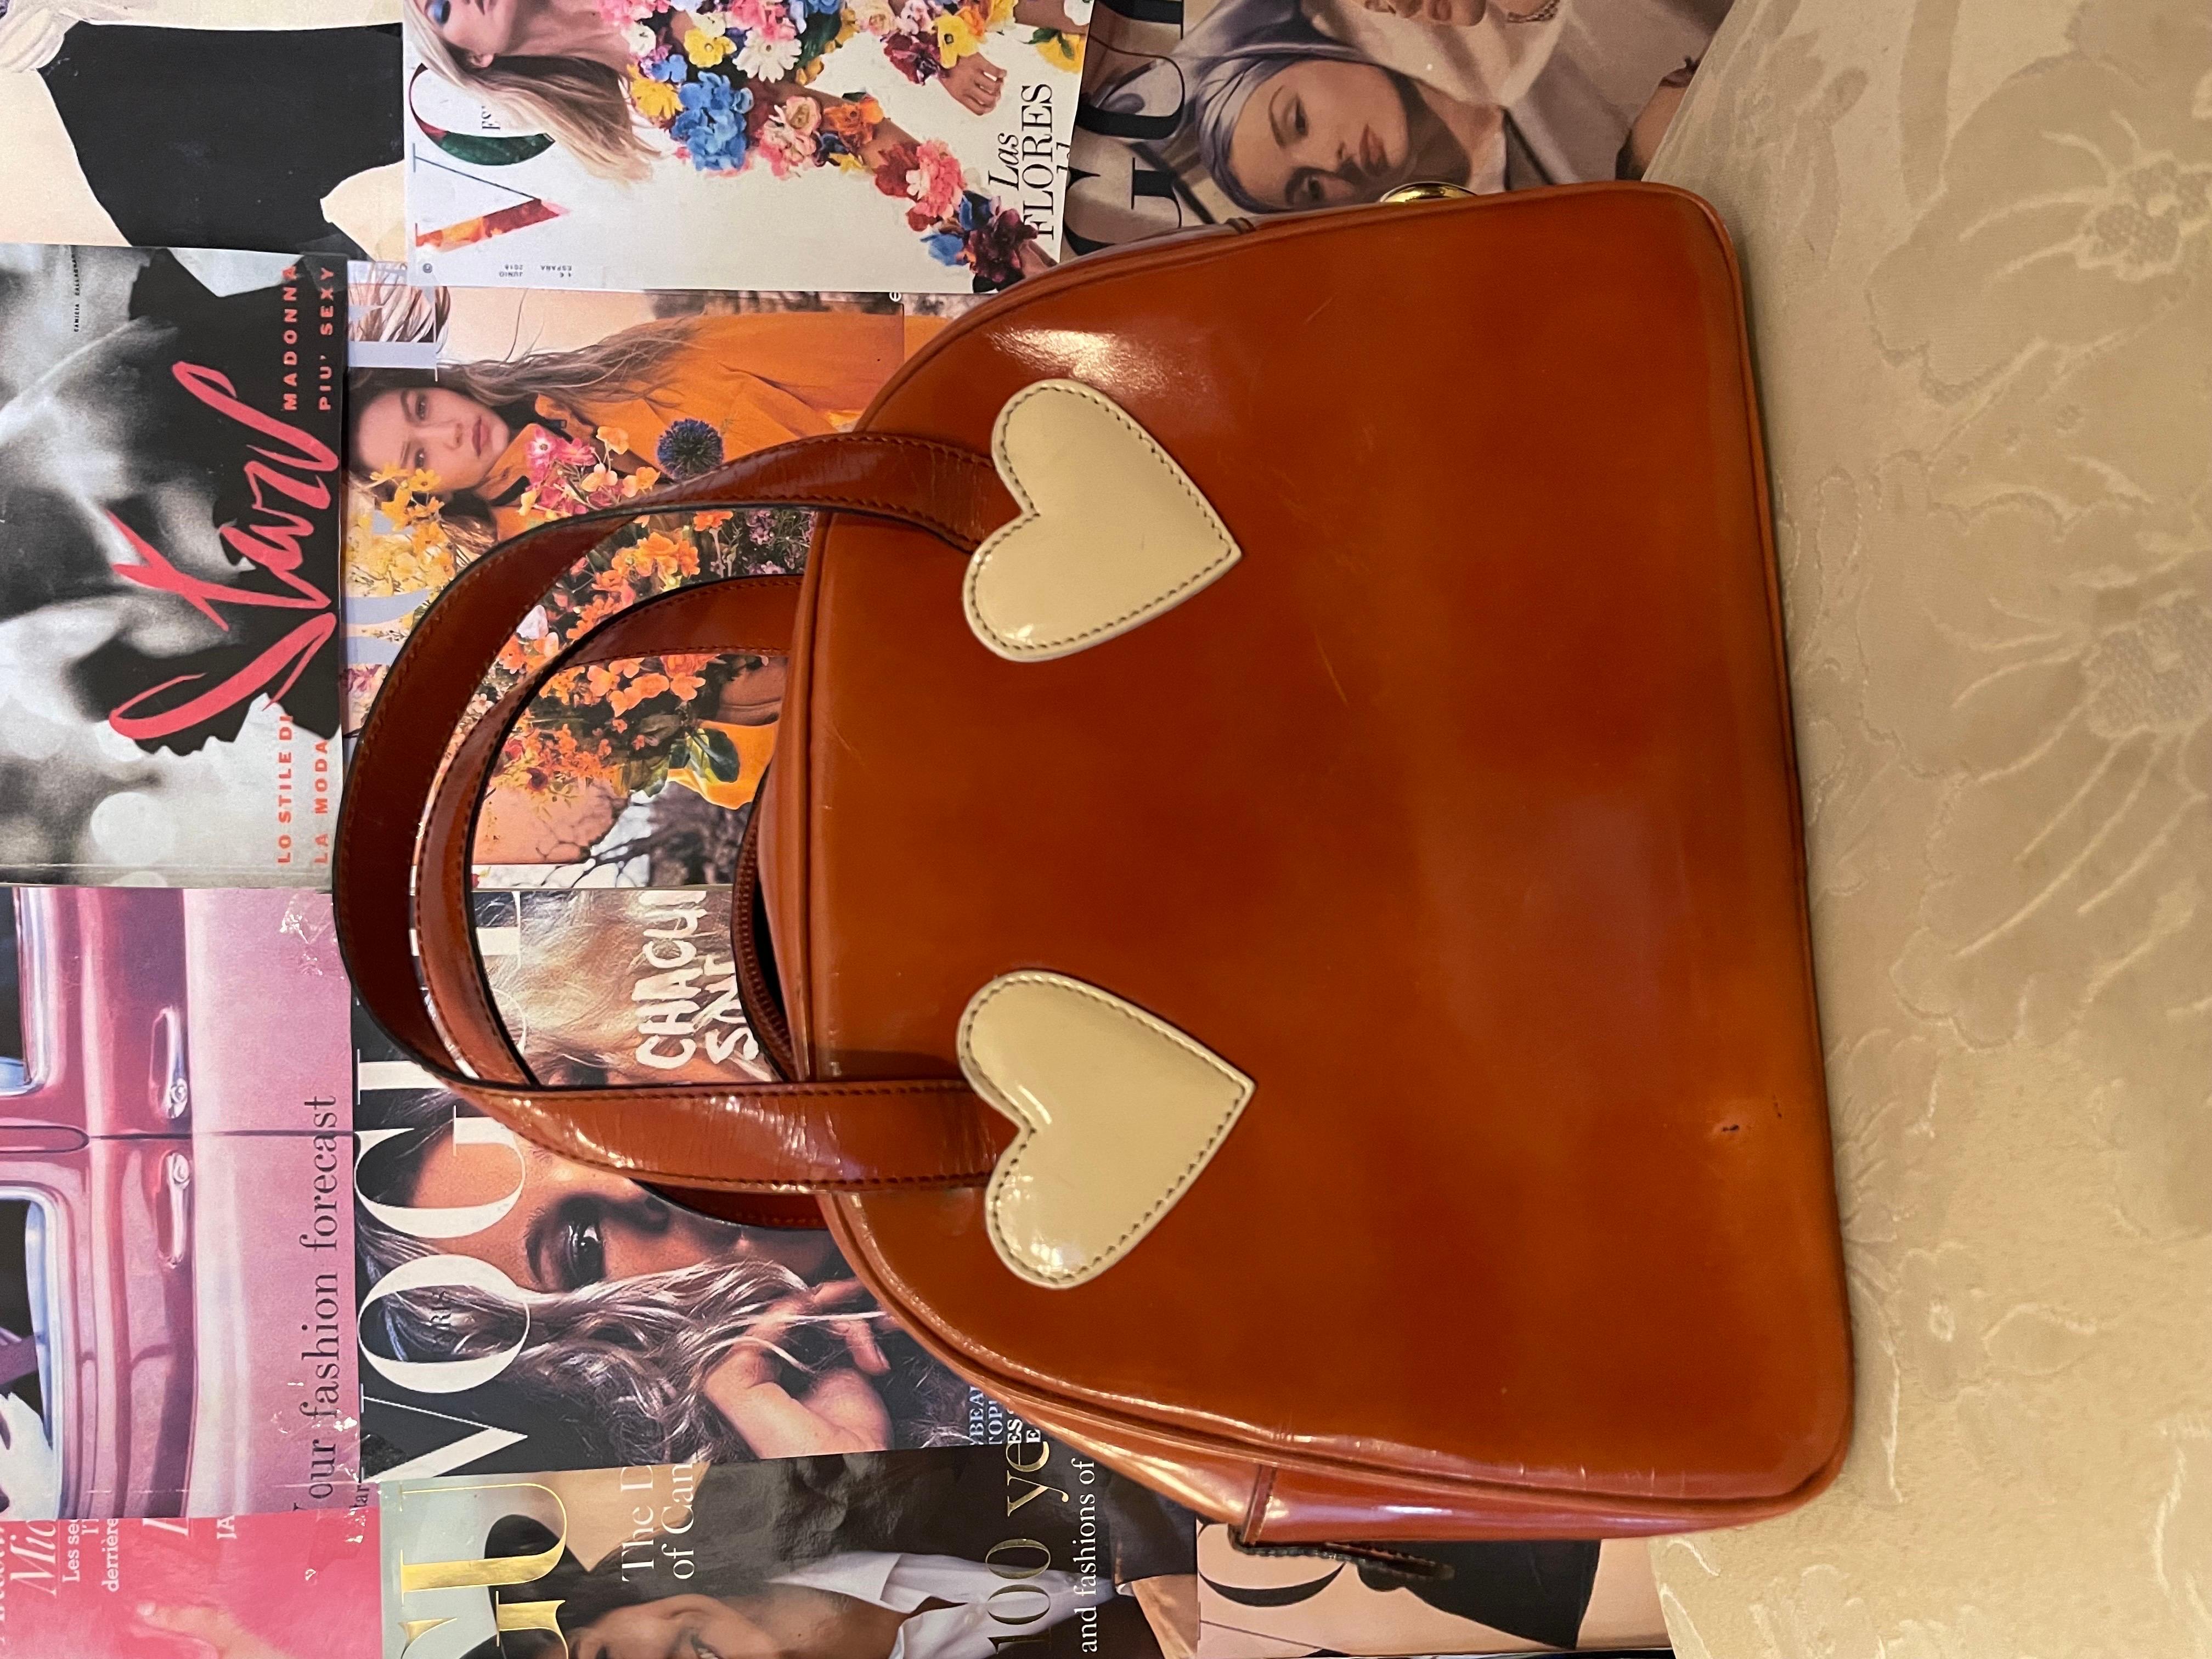 Vintage 1990s Moschino by redWall bowling bag, the Red and black version as been seen on Fran fine on the hit sitcom the Nanny. 
Vintage yet still fashion and trendy. 
Minor signs of use but barely noticeable in good condition inside and outside.